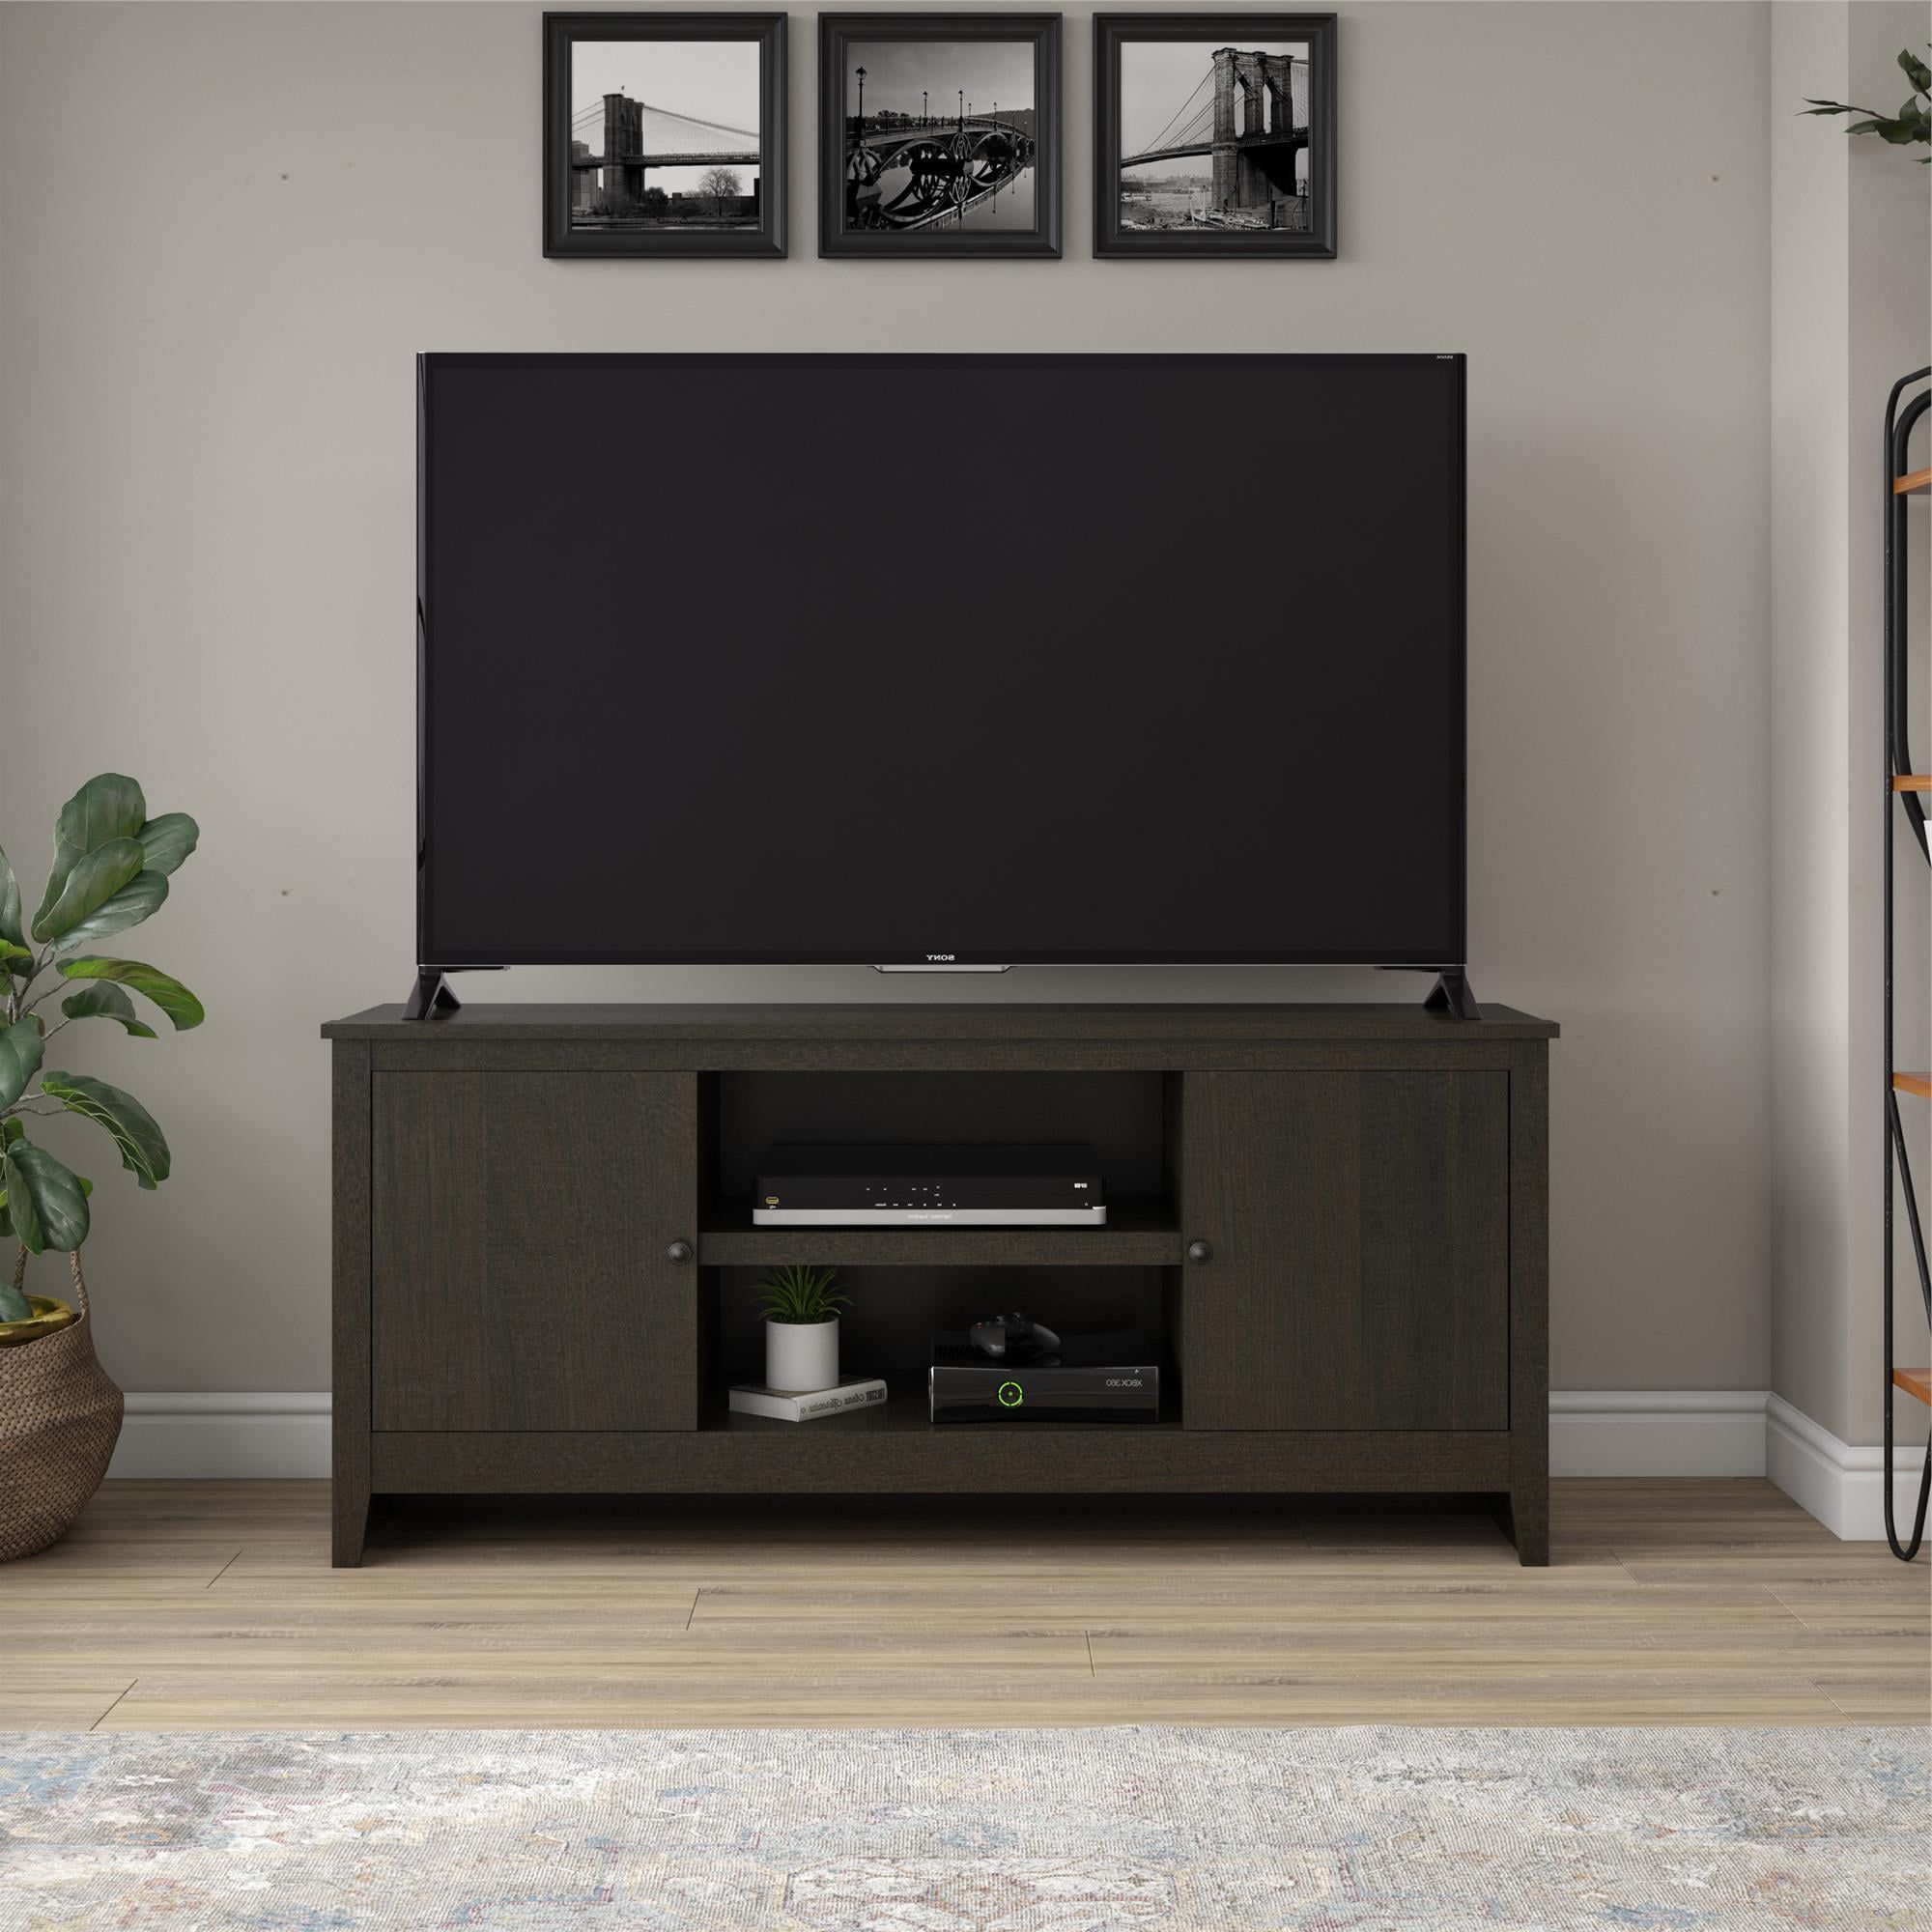 Fashionable Cafe Tv Stands With Storage Regarding Mainstays 65" Television Stand Espresso – Walmart (View 4 of 15)